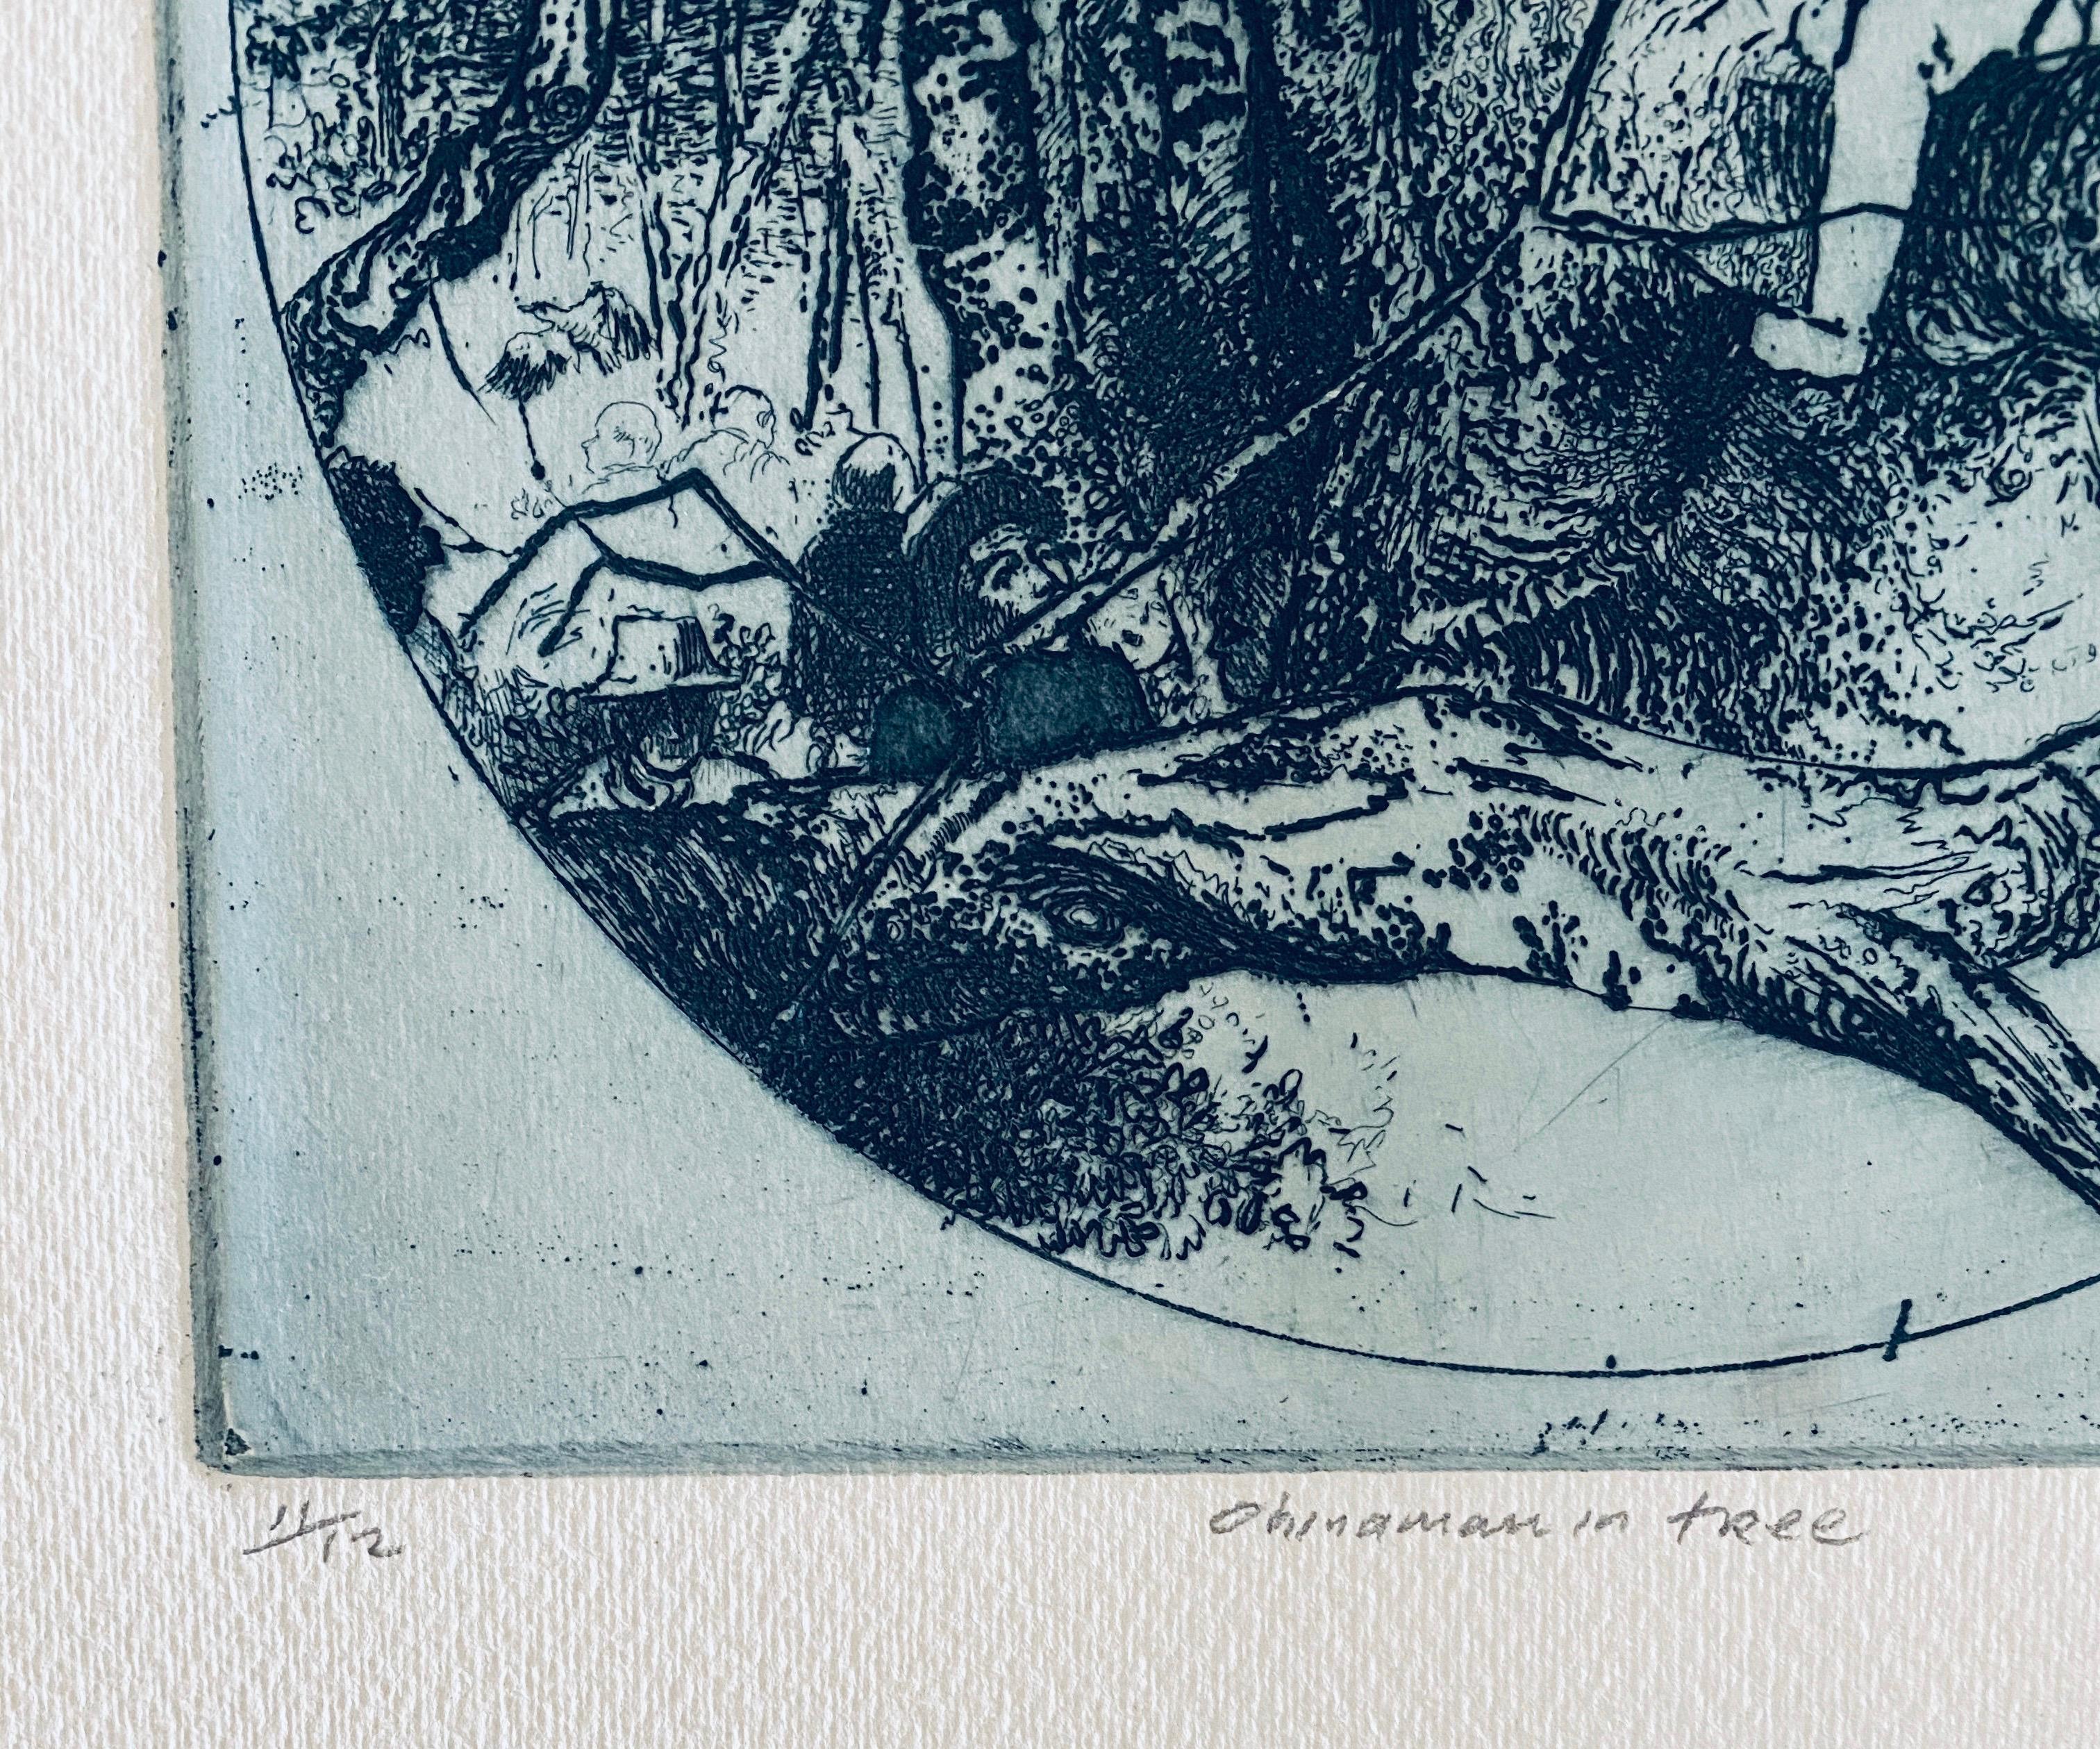 Chinese Man In Tree, American Modernist Abstract Etching - Gray Interior Print by Robert A. Birmelin